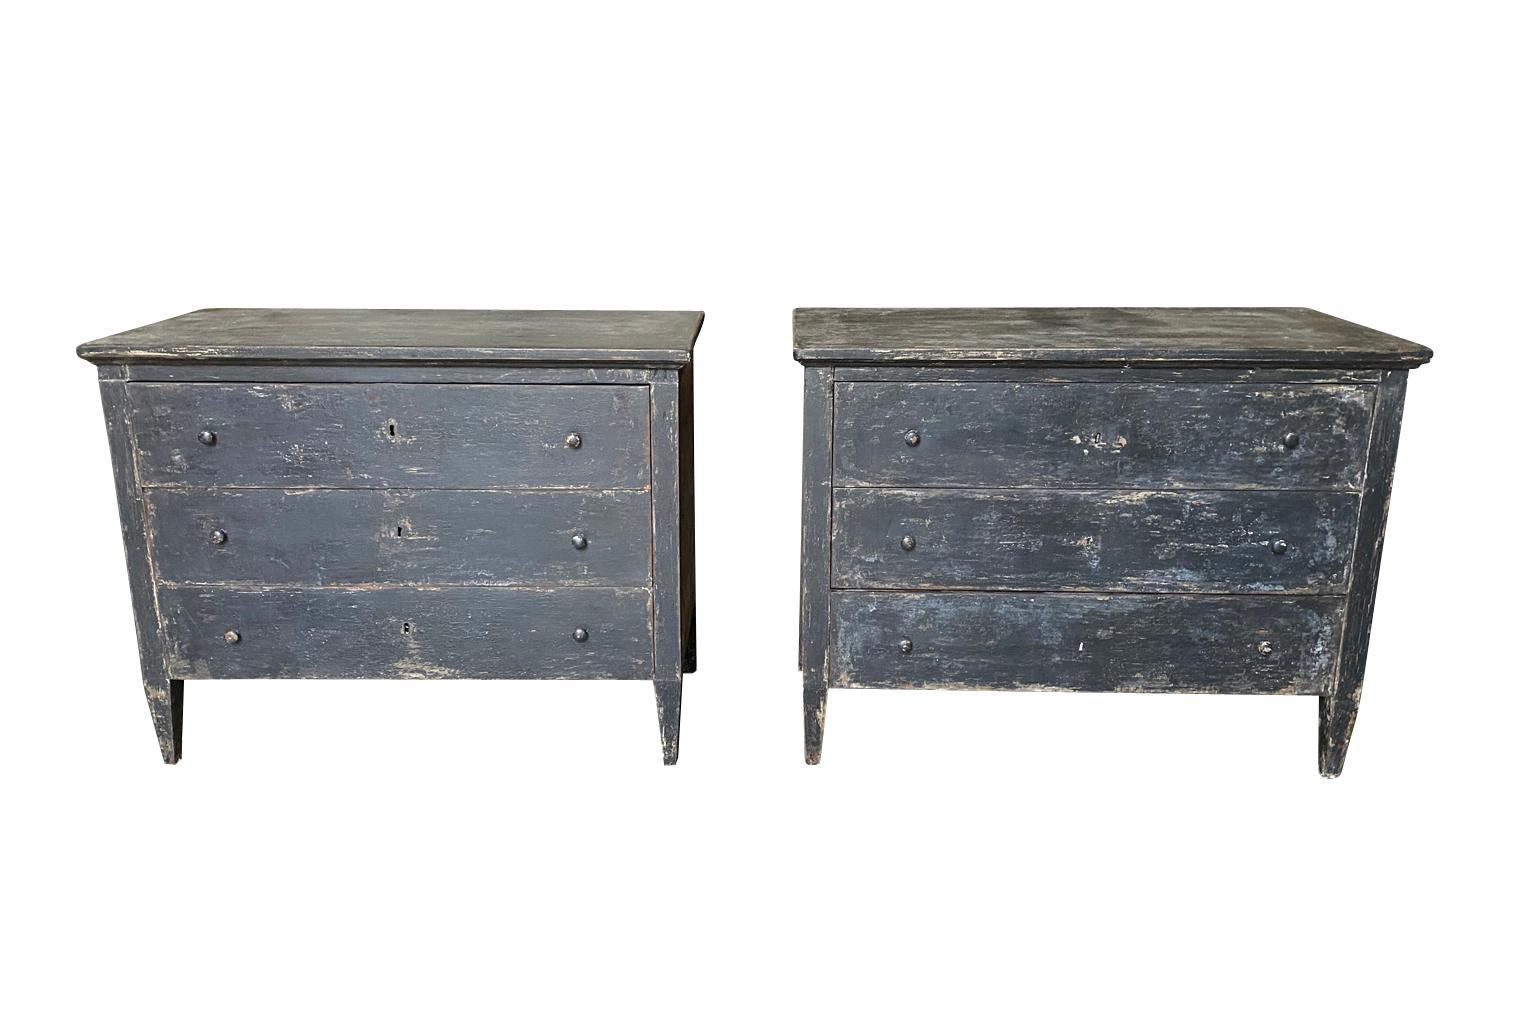 A sensational pair of late 19th century painted commodes from Spain. Great construction with three drawers over tapered legs. The painted finish is wonderful with a beautiful patina and texture. Great as bedside cabinets or converted into vanities.